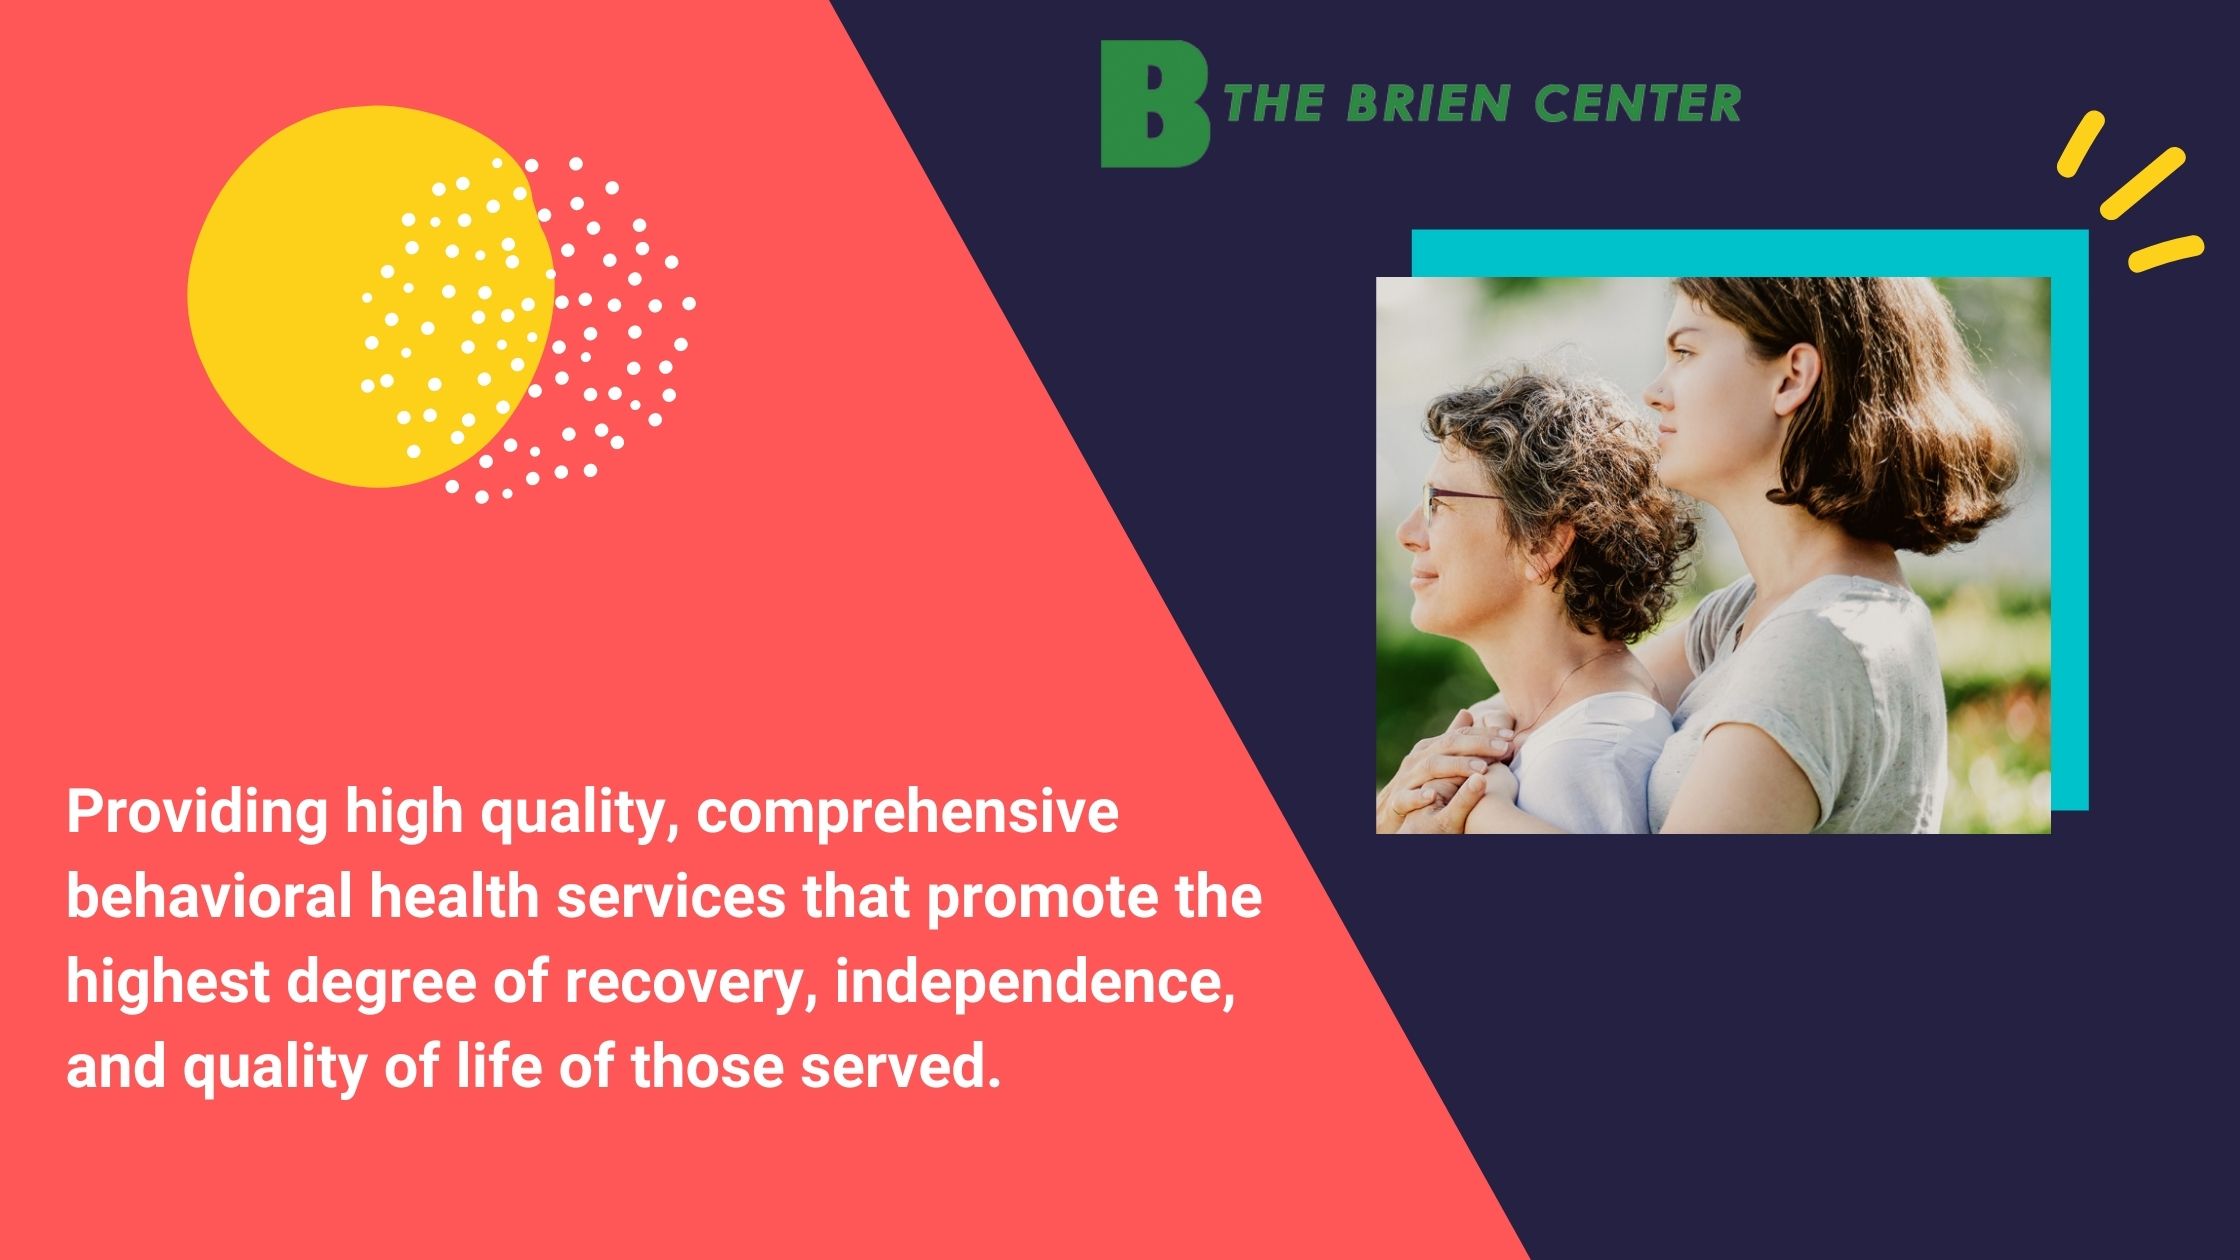 The Brien Center for Mental Health & Substance Abuse Services